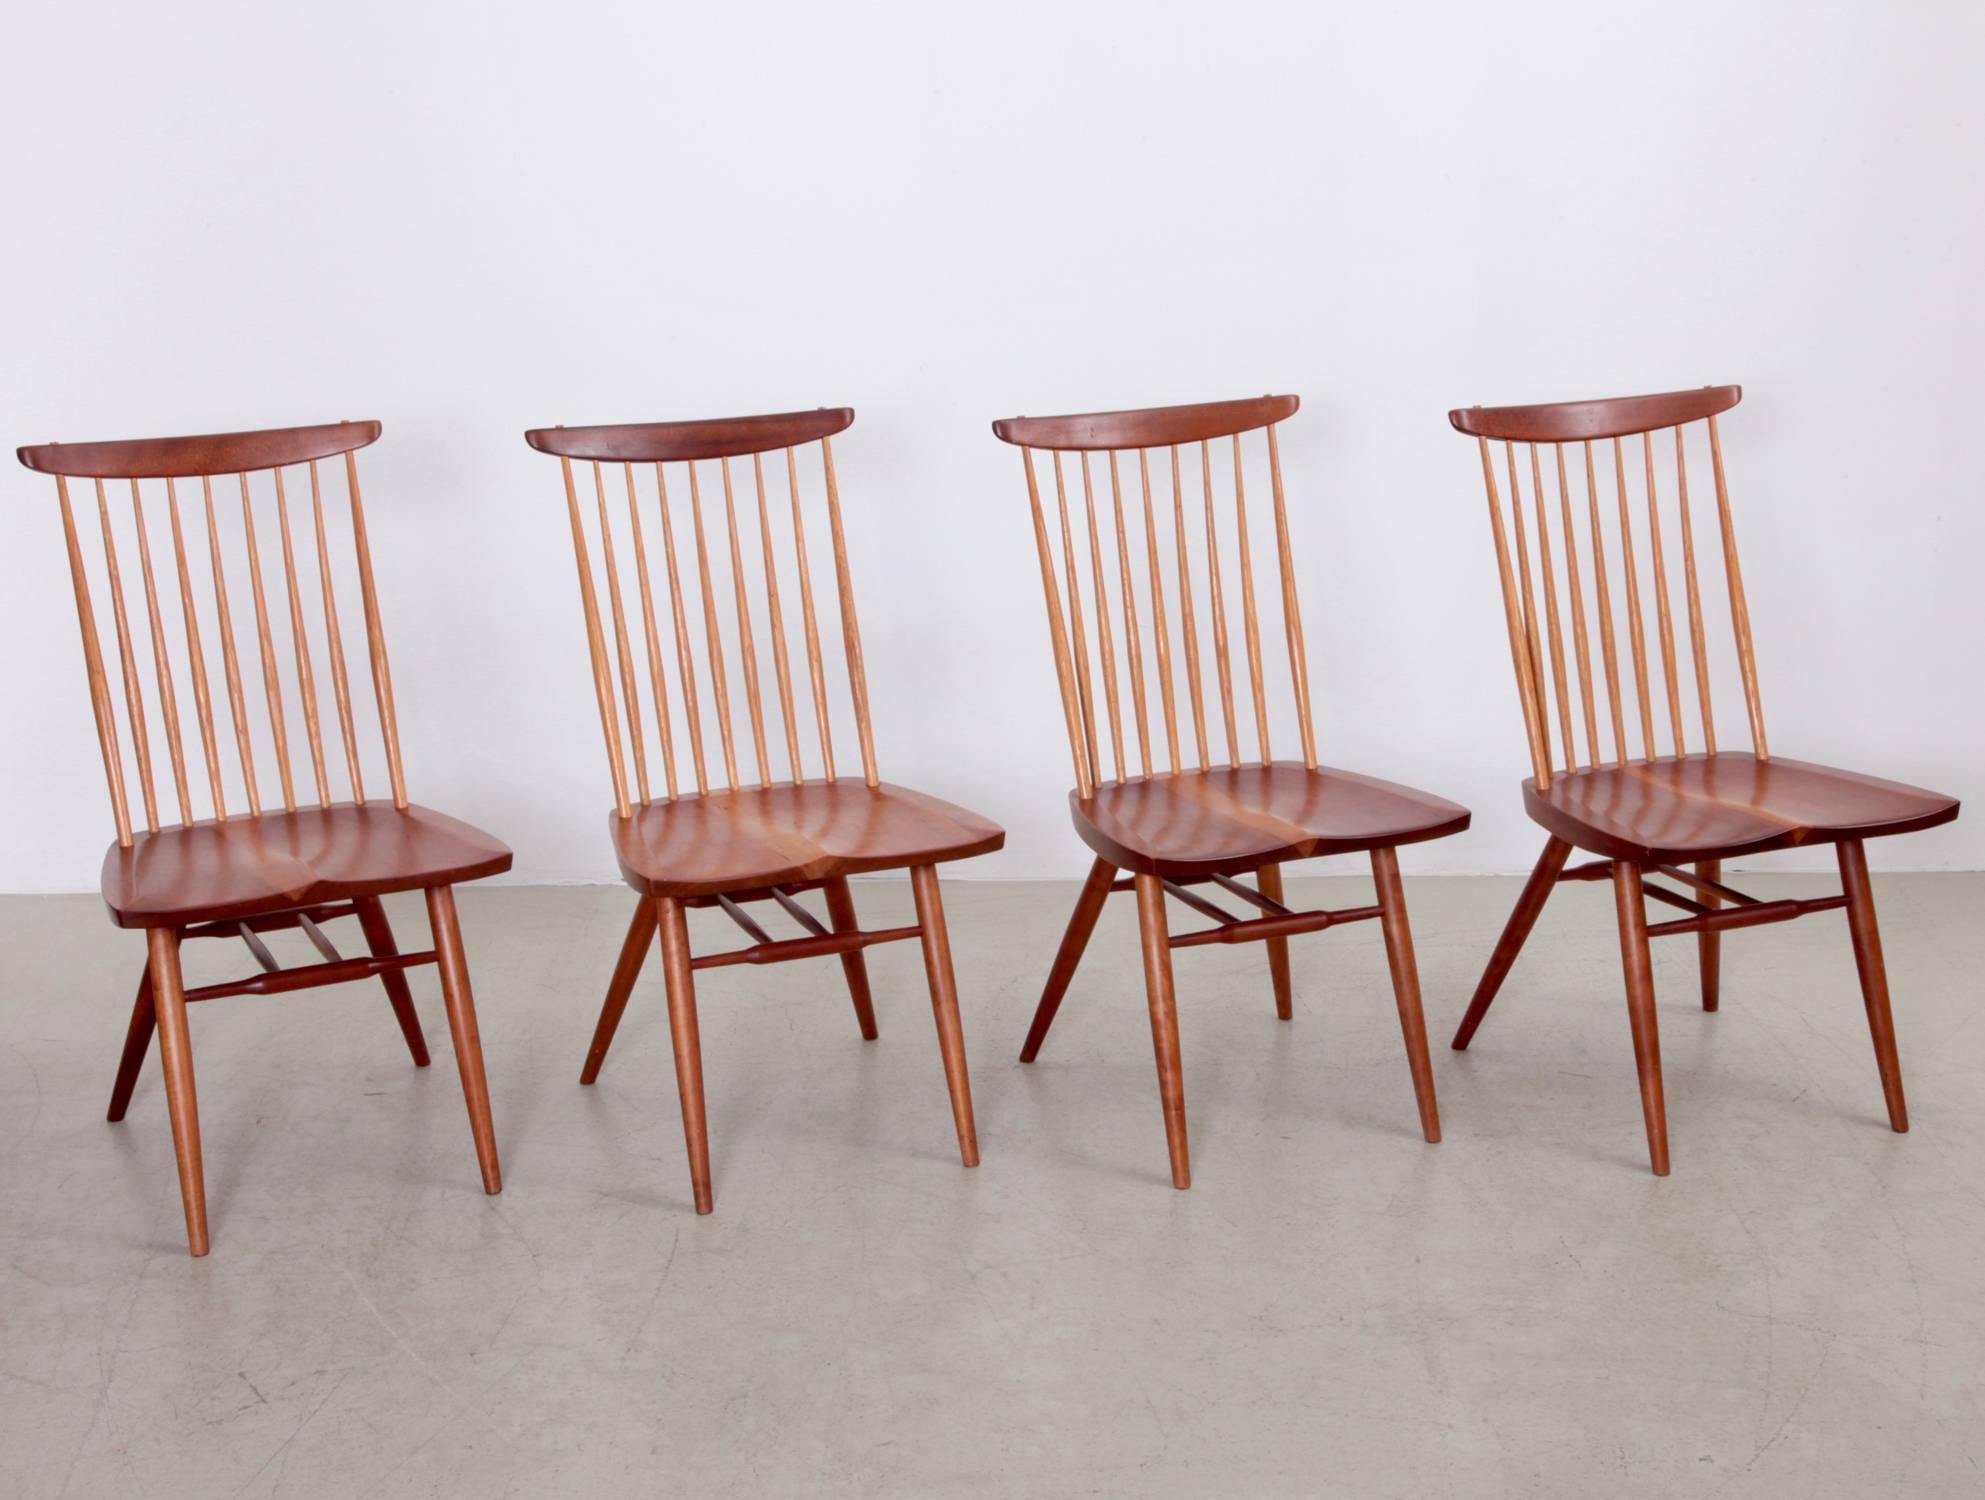 George Nakashima, set of four "New" chairs in cherry, hickory spindled back and saddle seat.